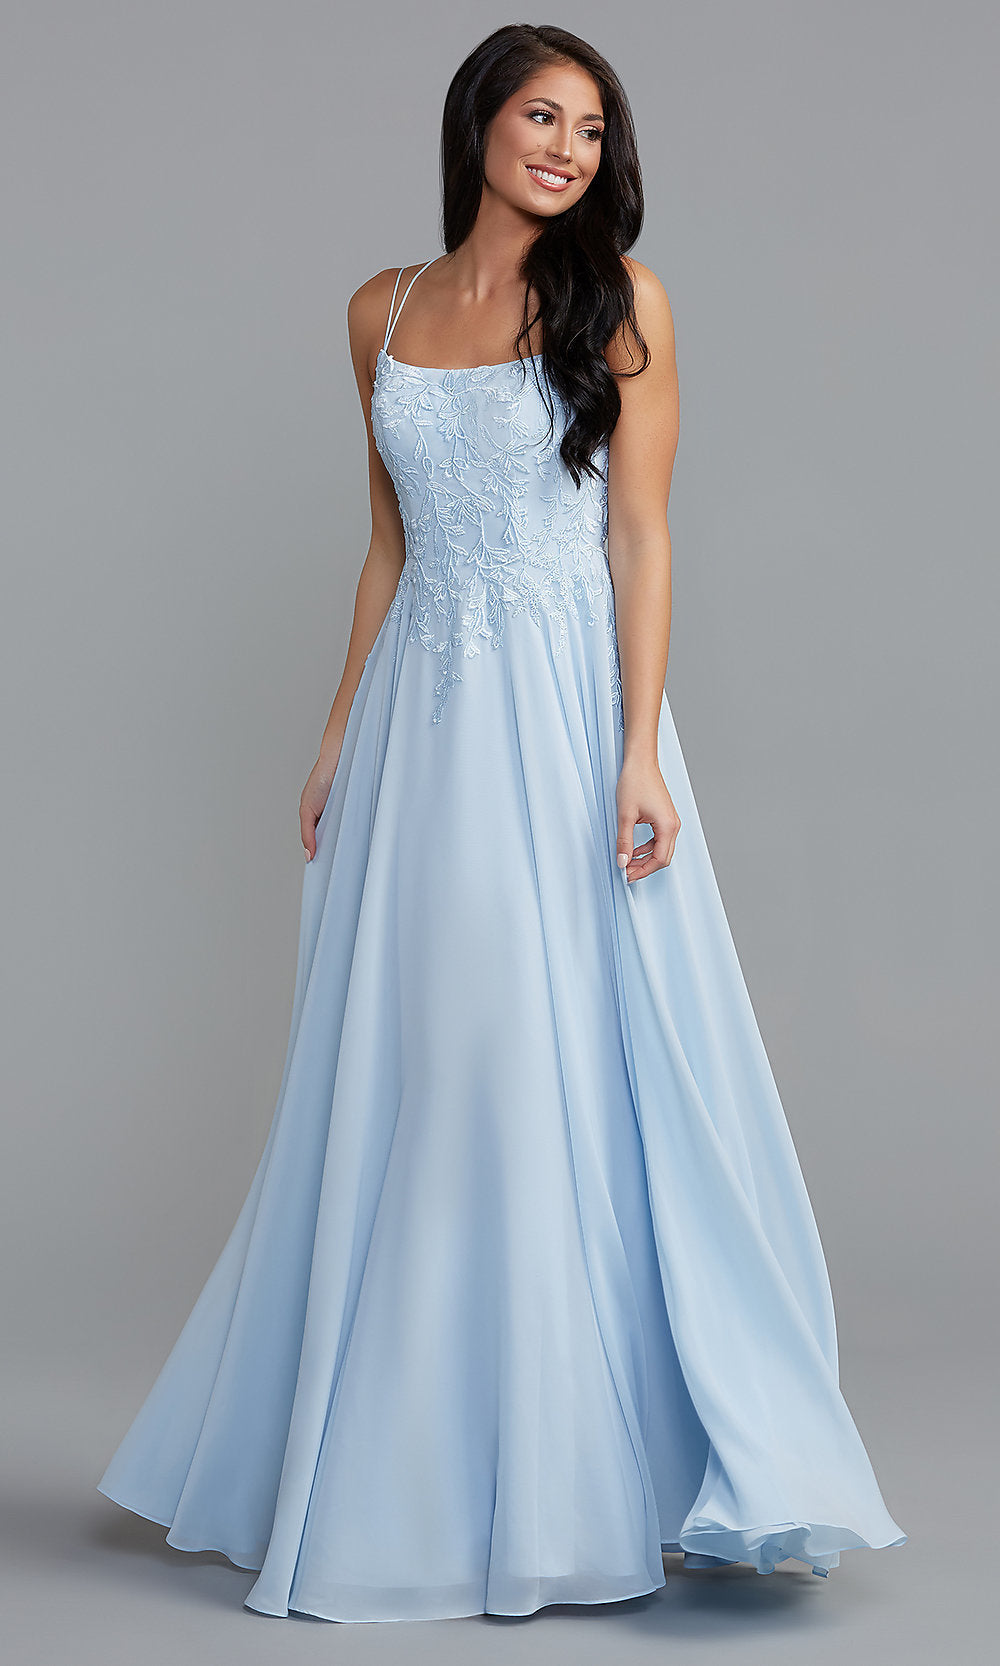 Long Embroidered-Bodice A-Line Prom Dress - PromGirl